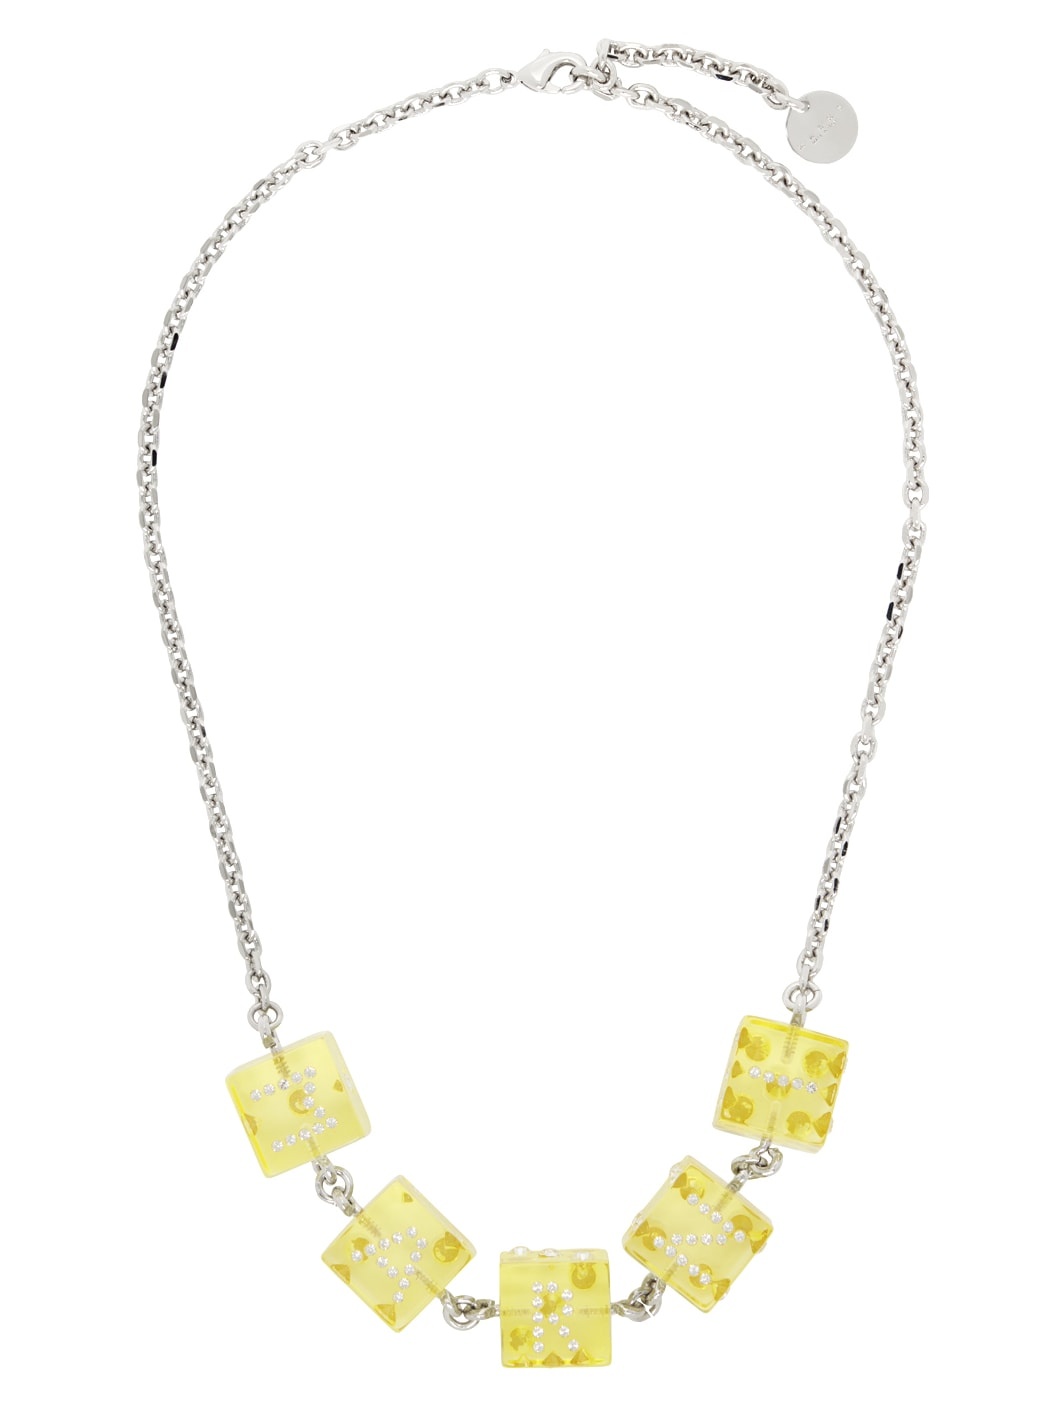 Silver & Yellow Dice Charm Necklace - 1